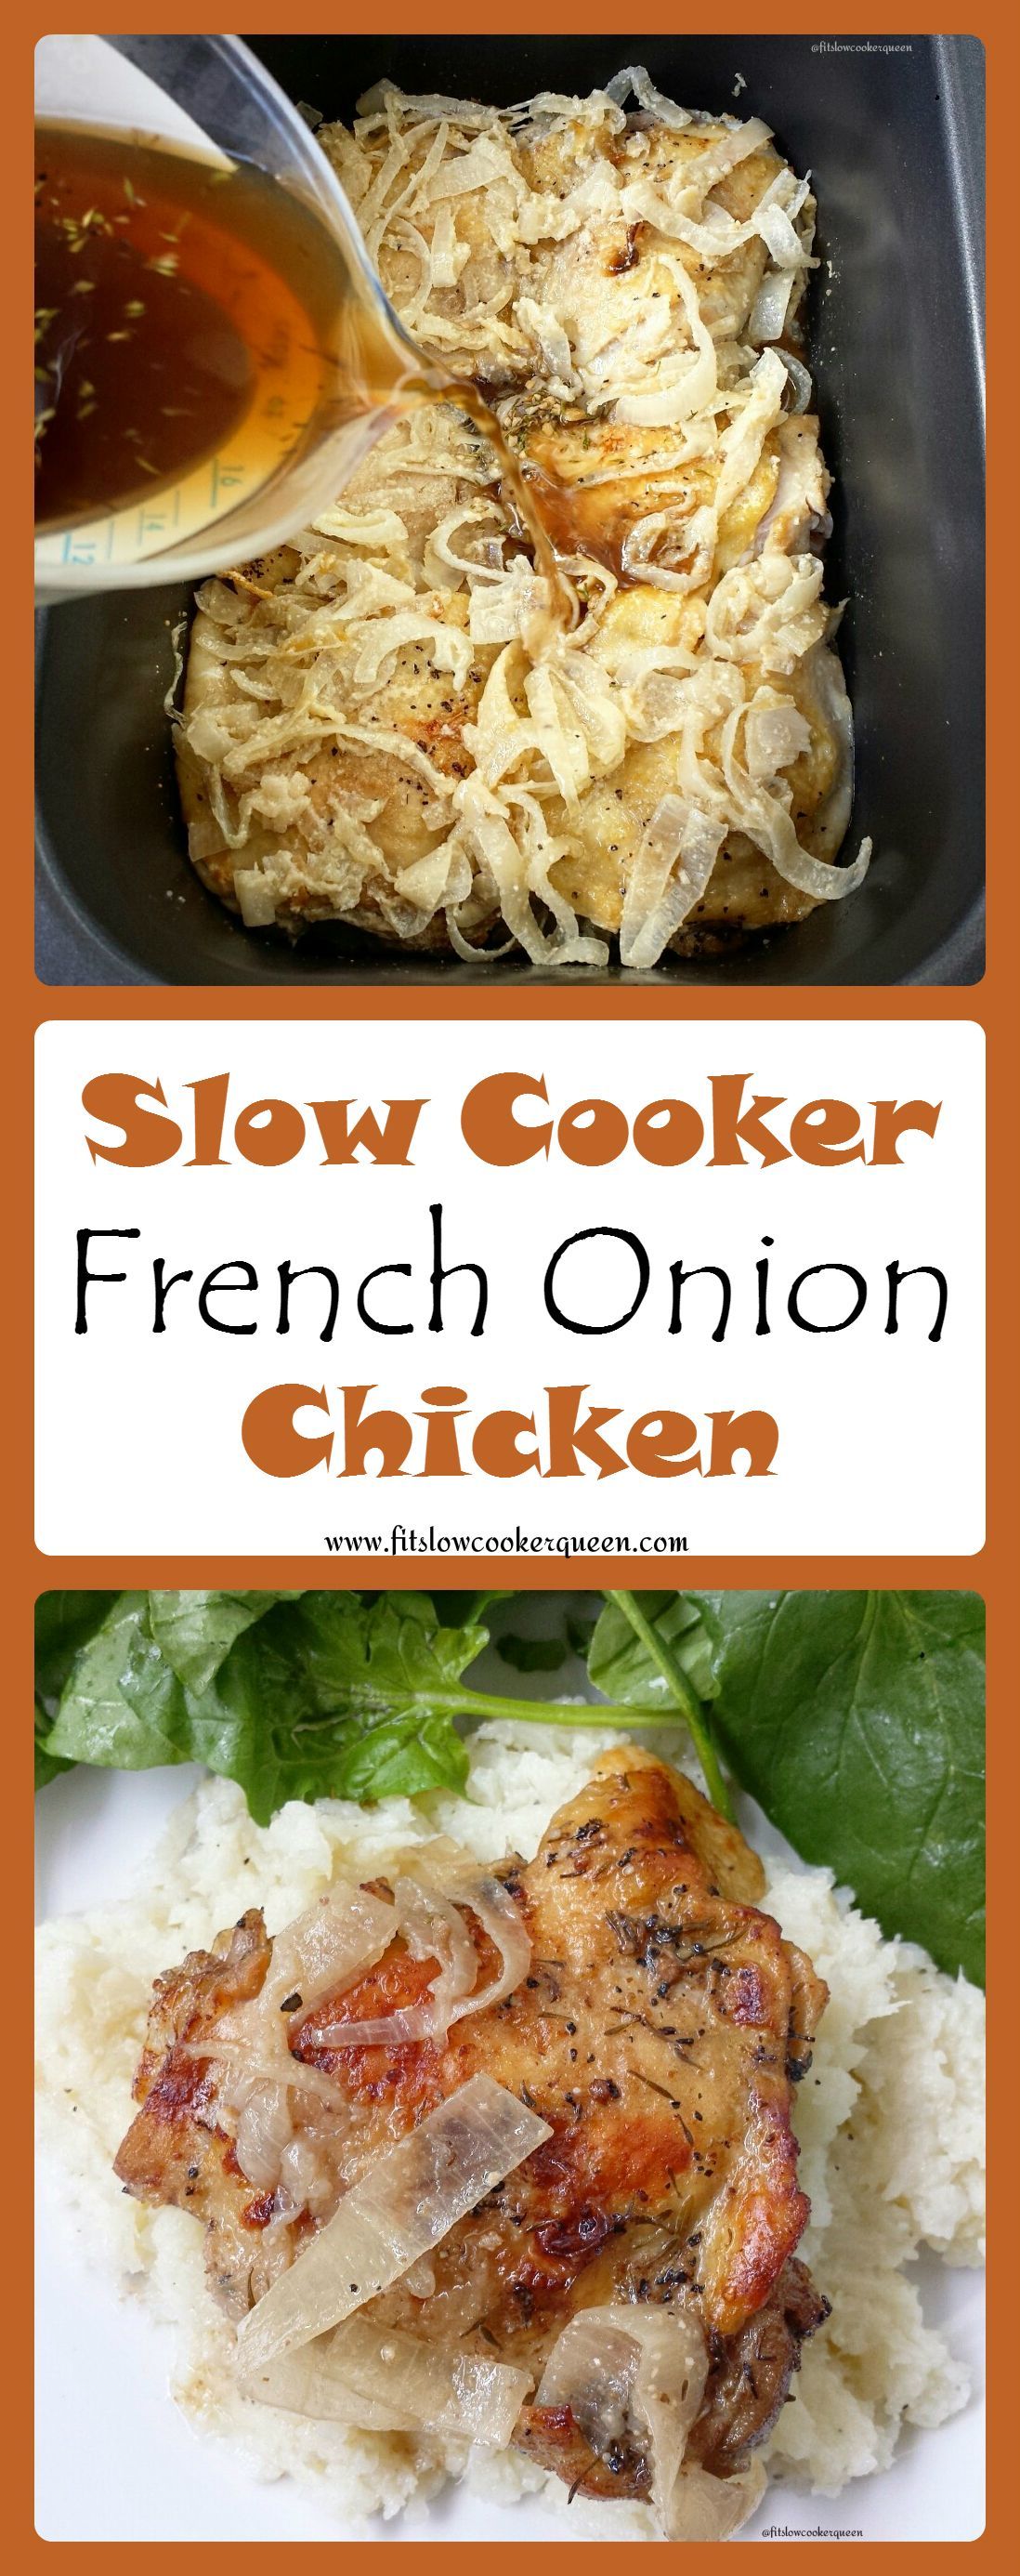 Slow Cooker French Onion Chicken (Whole30, Paleo) -   23 whole 30 crockpot
 ideas